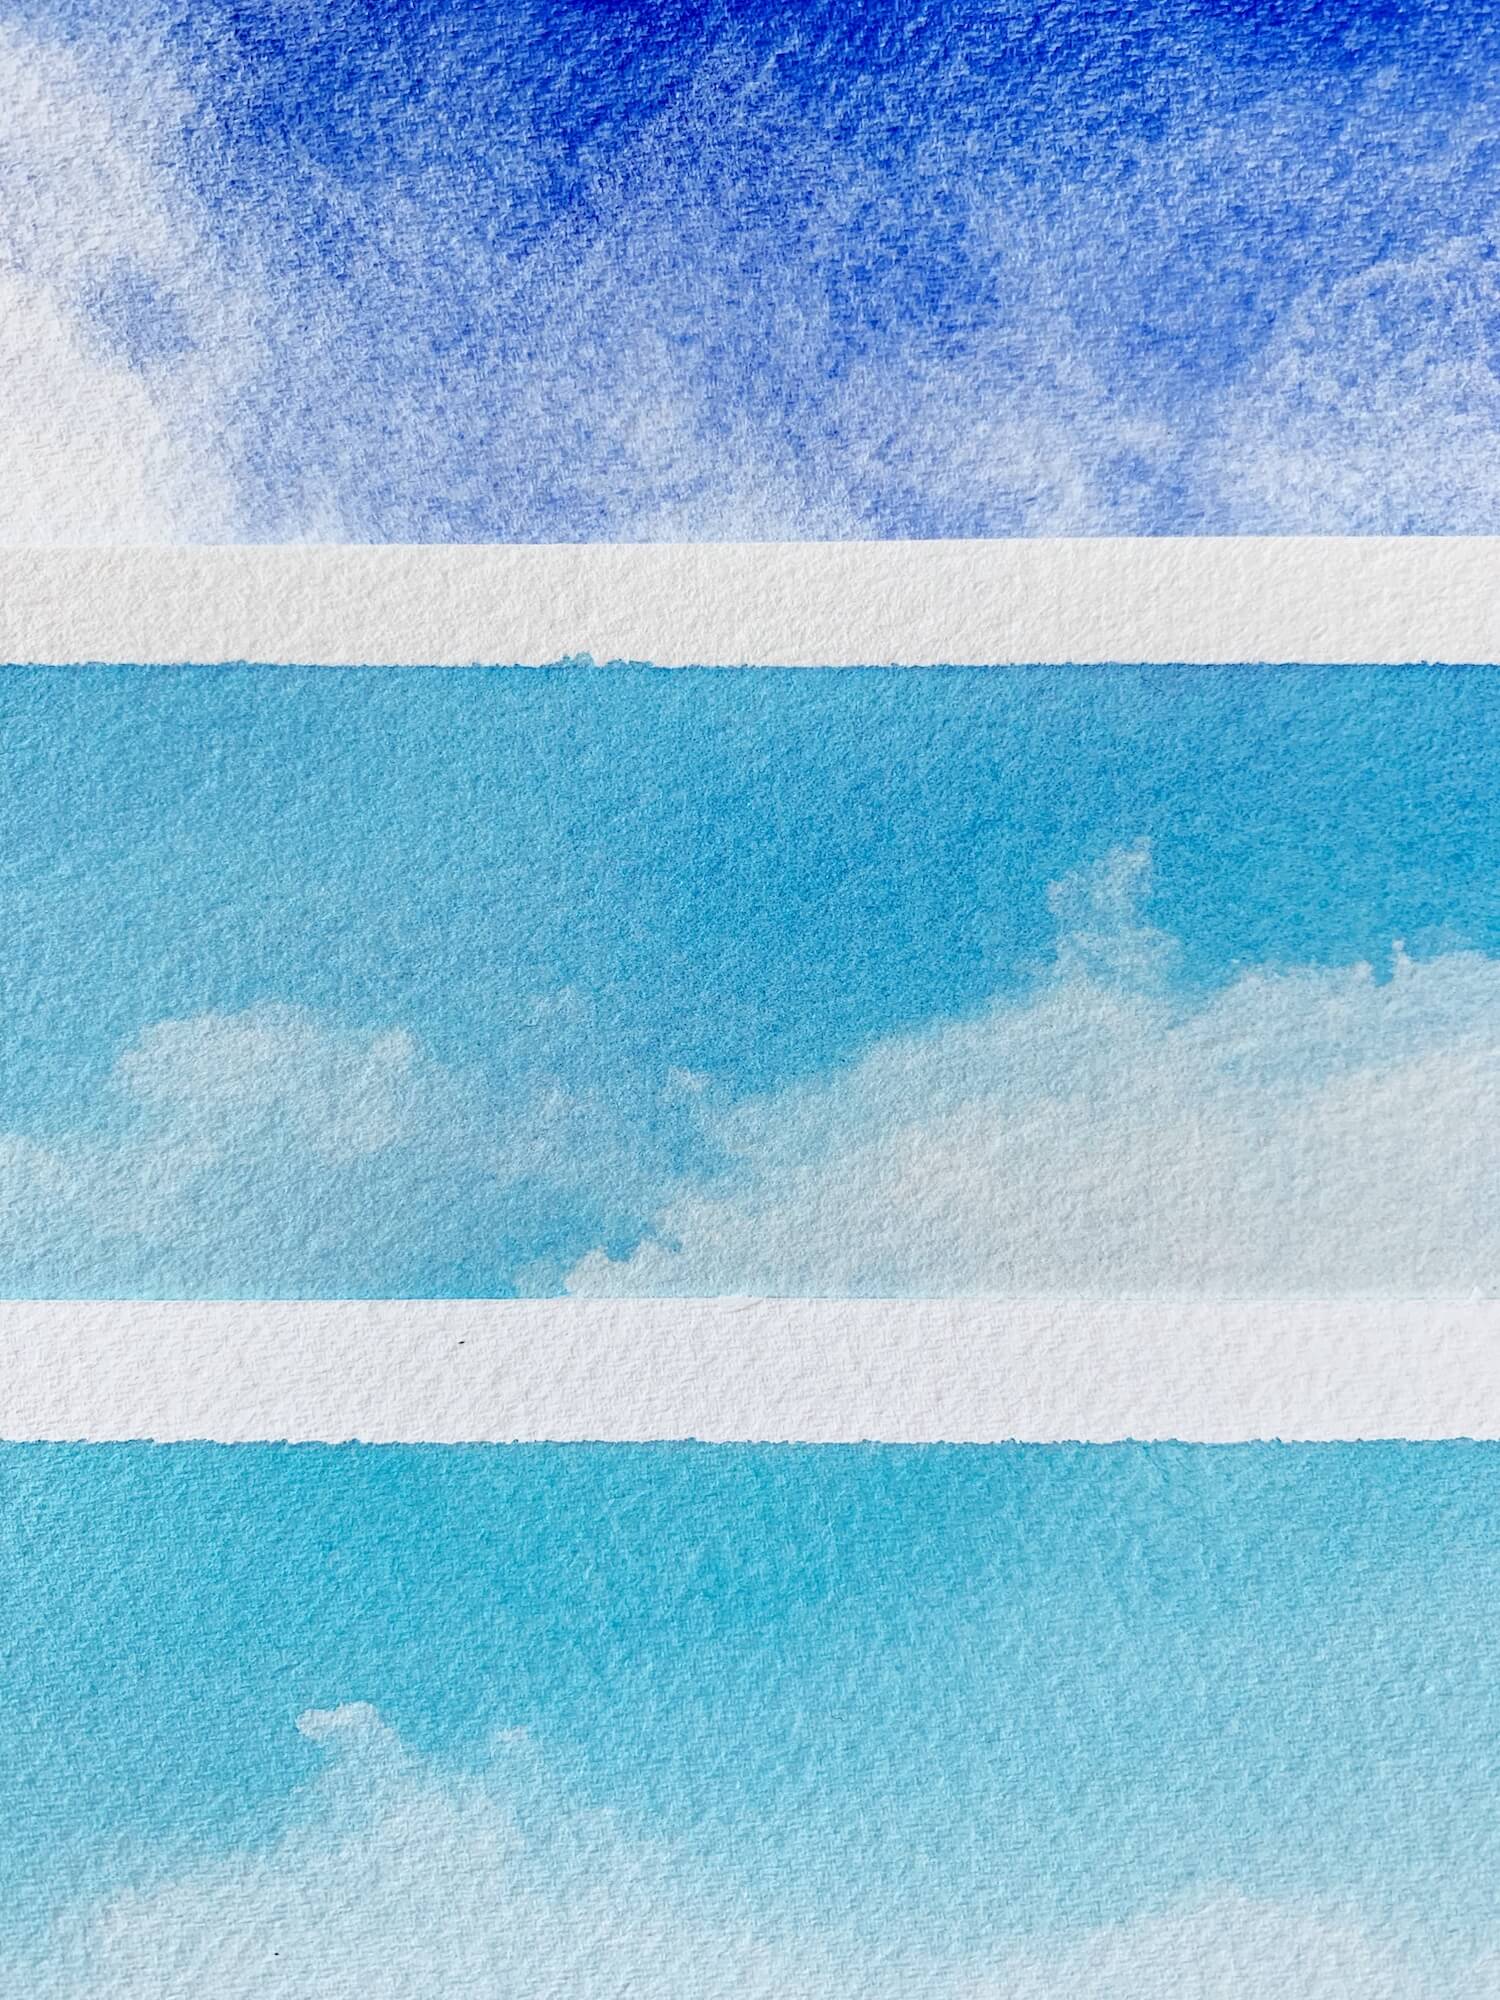 2 Ways To Watercolor Blue Skies and One Important Lesson | Susan Chiang